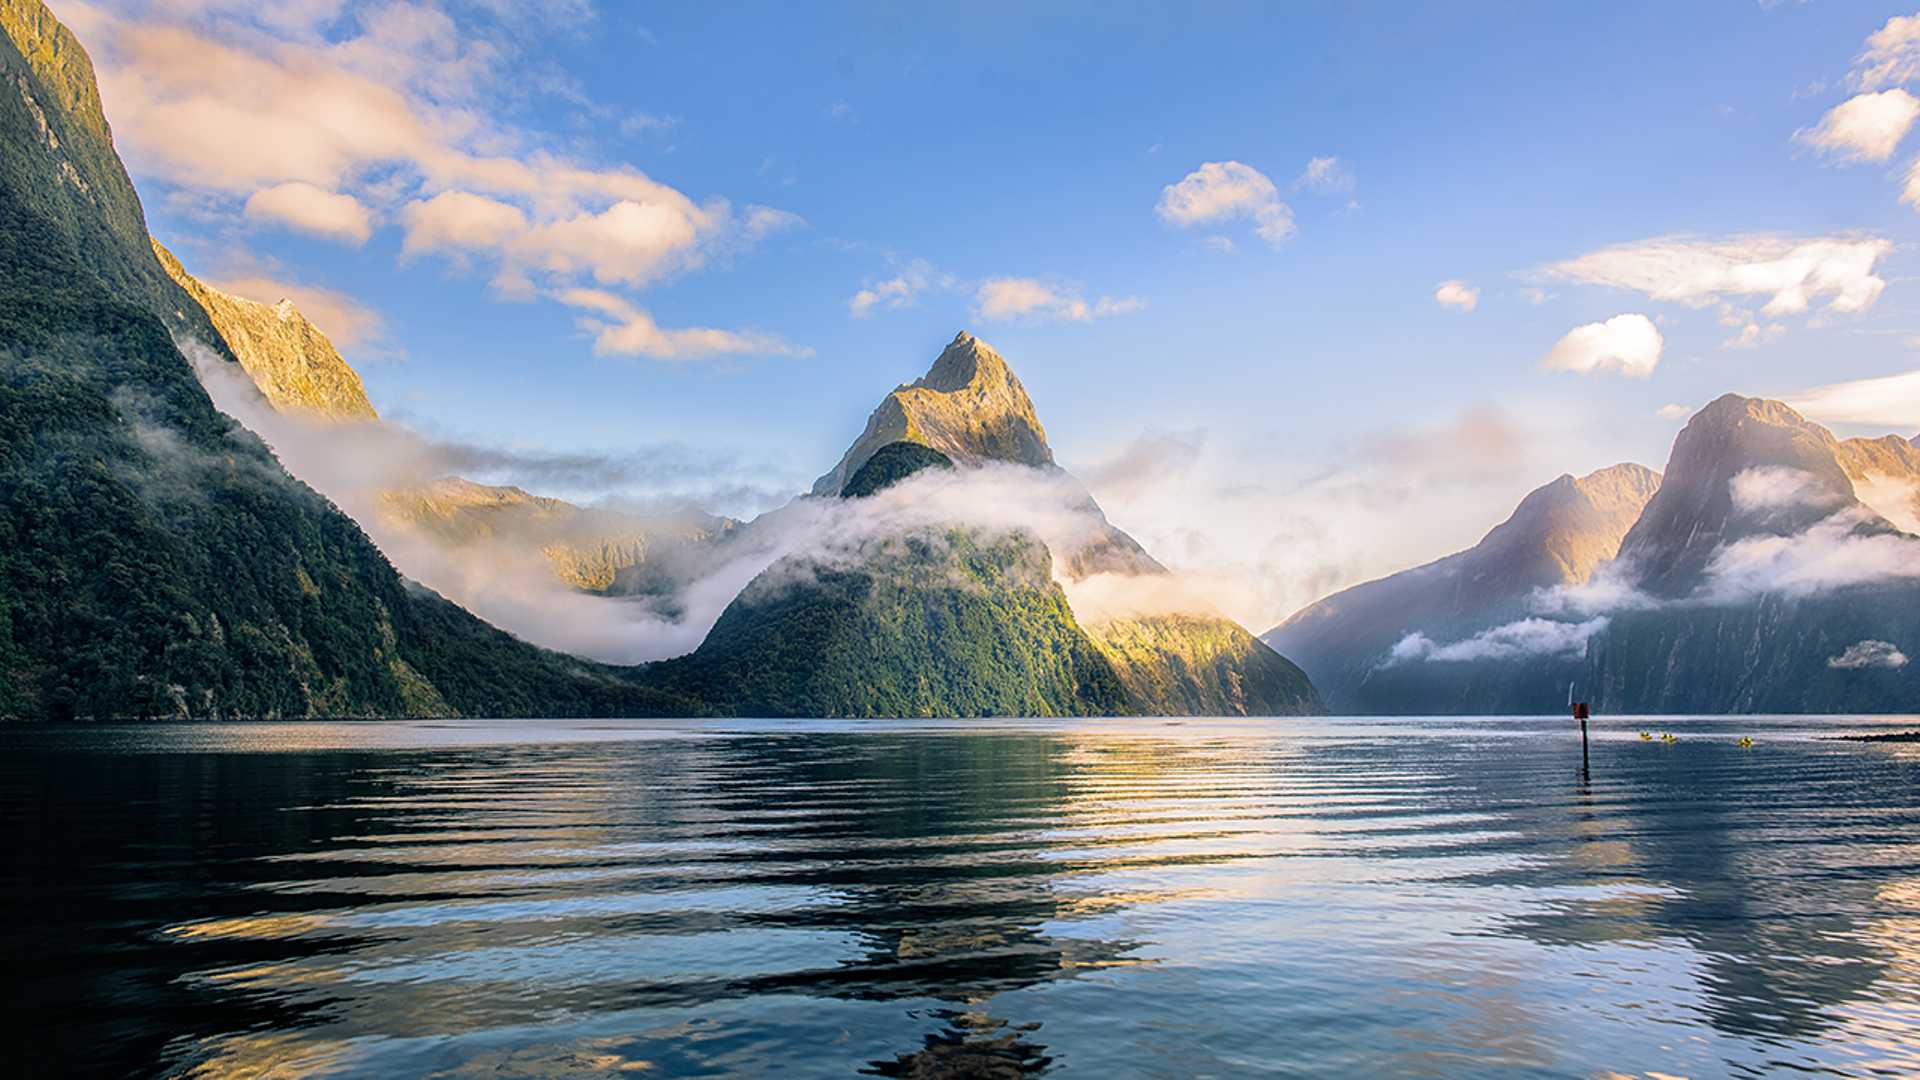 Premium Milford Sound Small Group Tour, Cruise & Picnic Lunch from Te Anau 